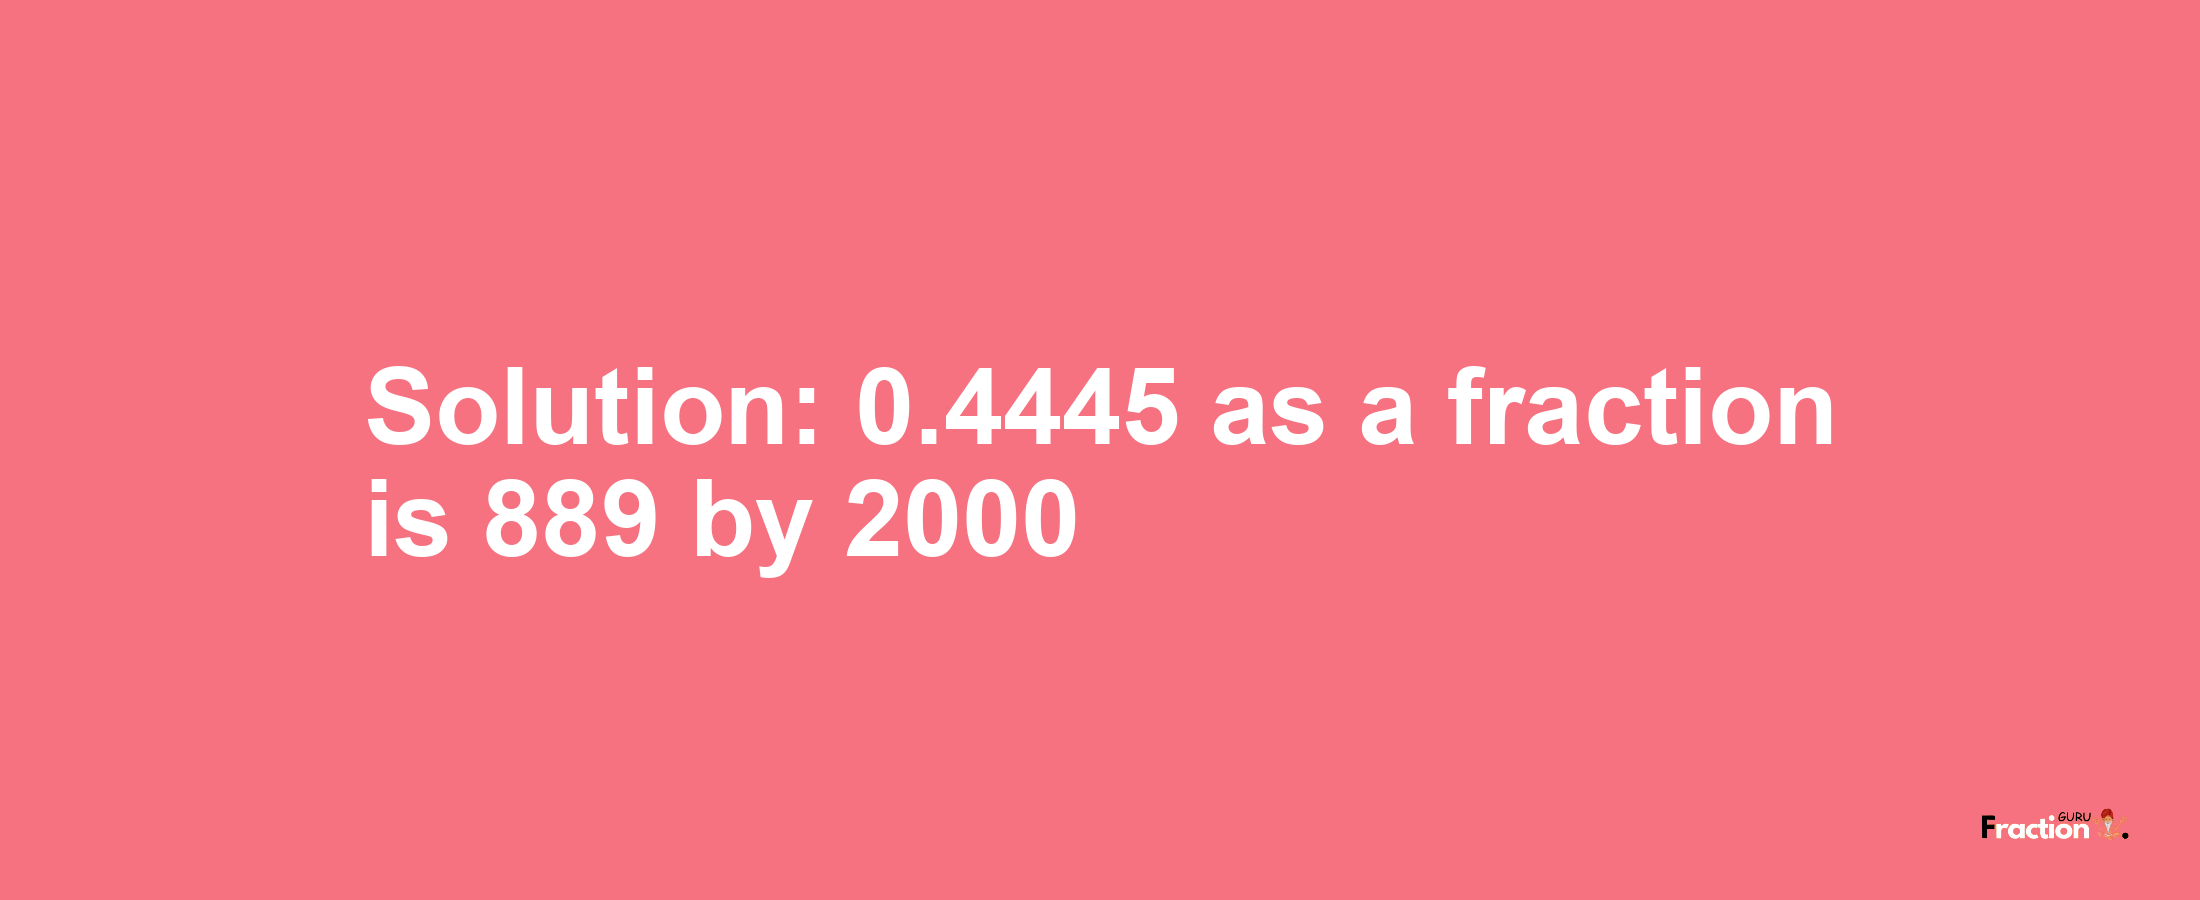 Solution:0.4445 as a fraction is 889/2000